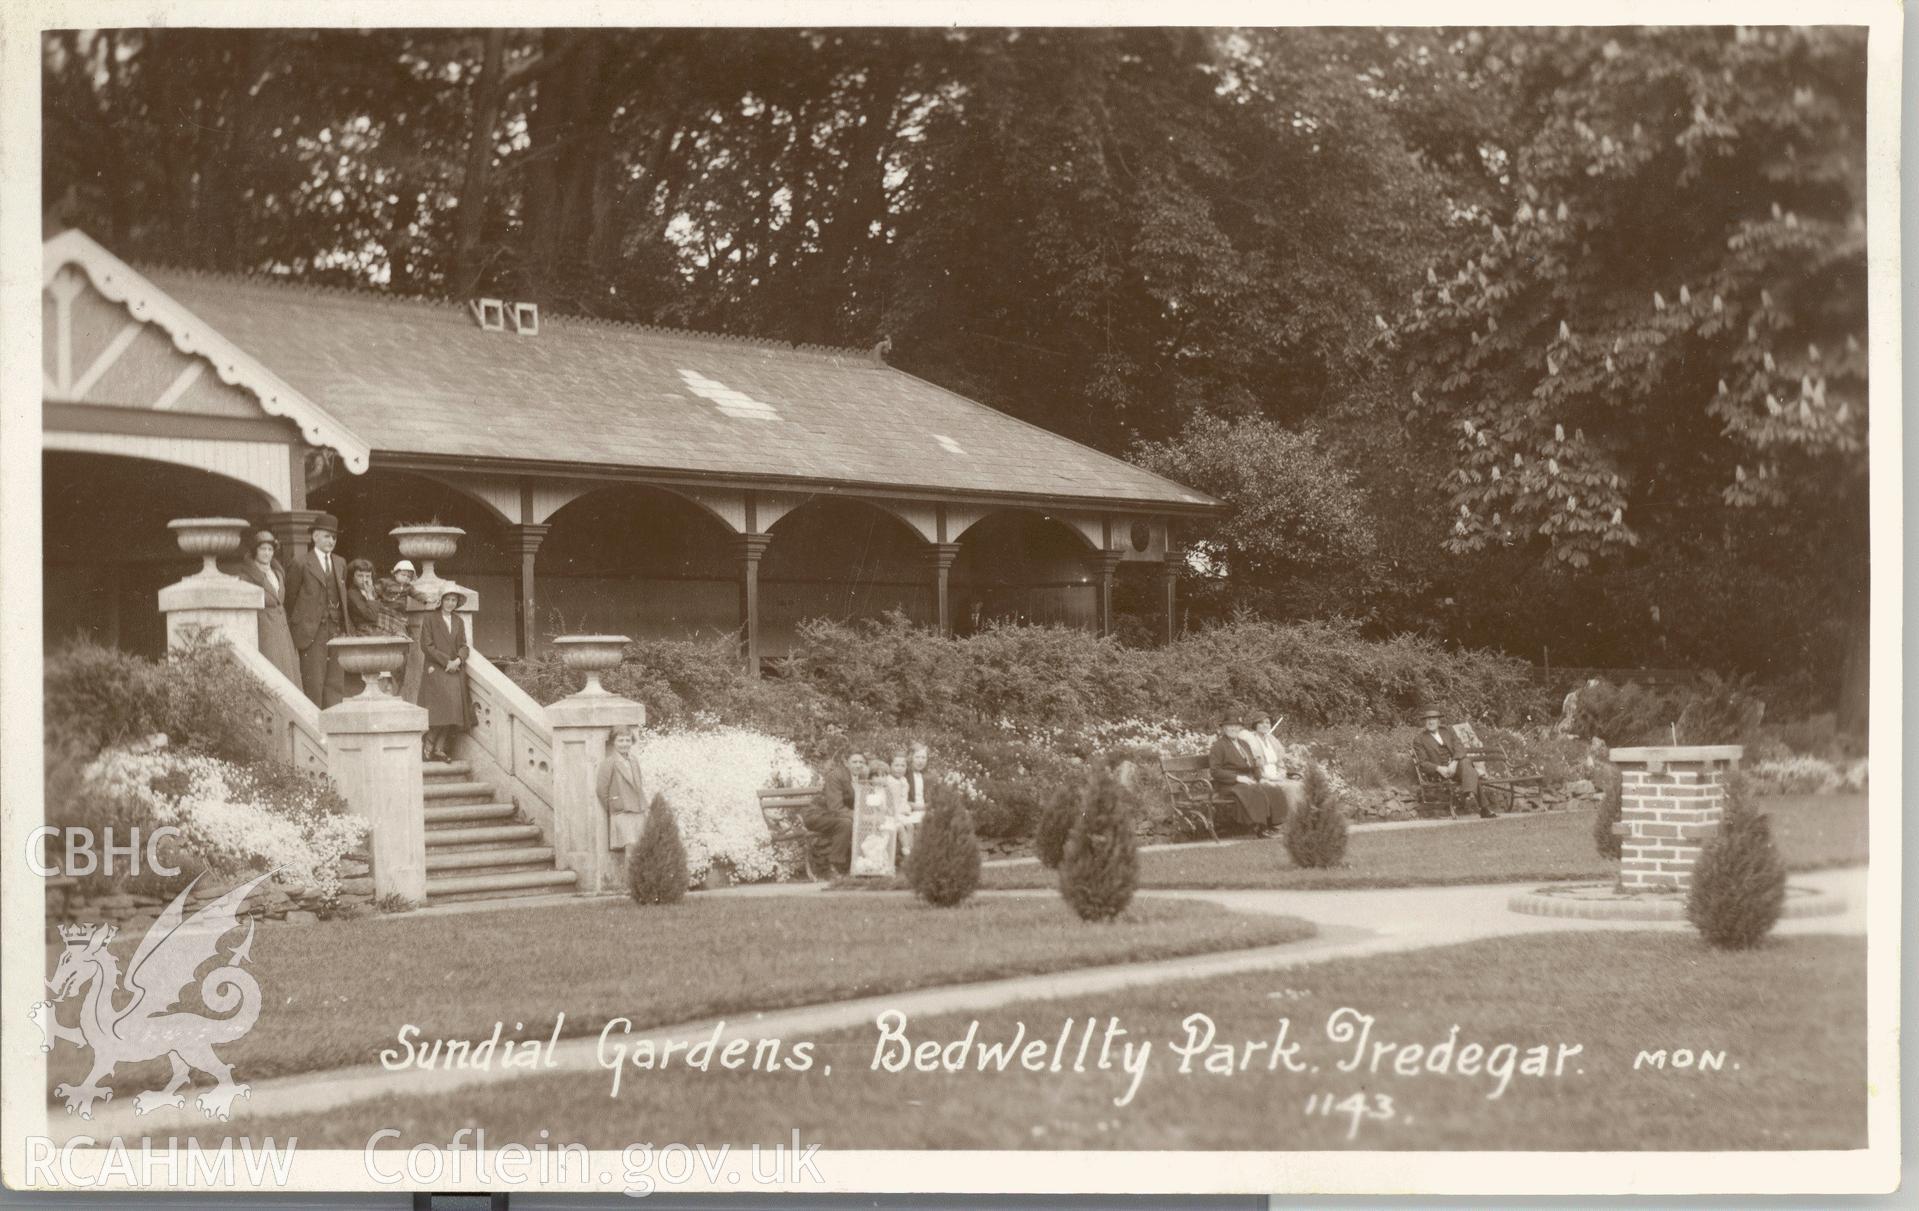 Digitised postcard image of Sundial Gardens, Bedwellty Park, Tredegar. Produced by Parks and Gardens Data Services, from an original item in the Peter Davis Collection at Parks and Gardens UK. We hold only web-resolution images of this collection, suitable for viewing on screen and for research purposes only. We do not hold the original images, or publication quality scans.